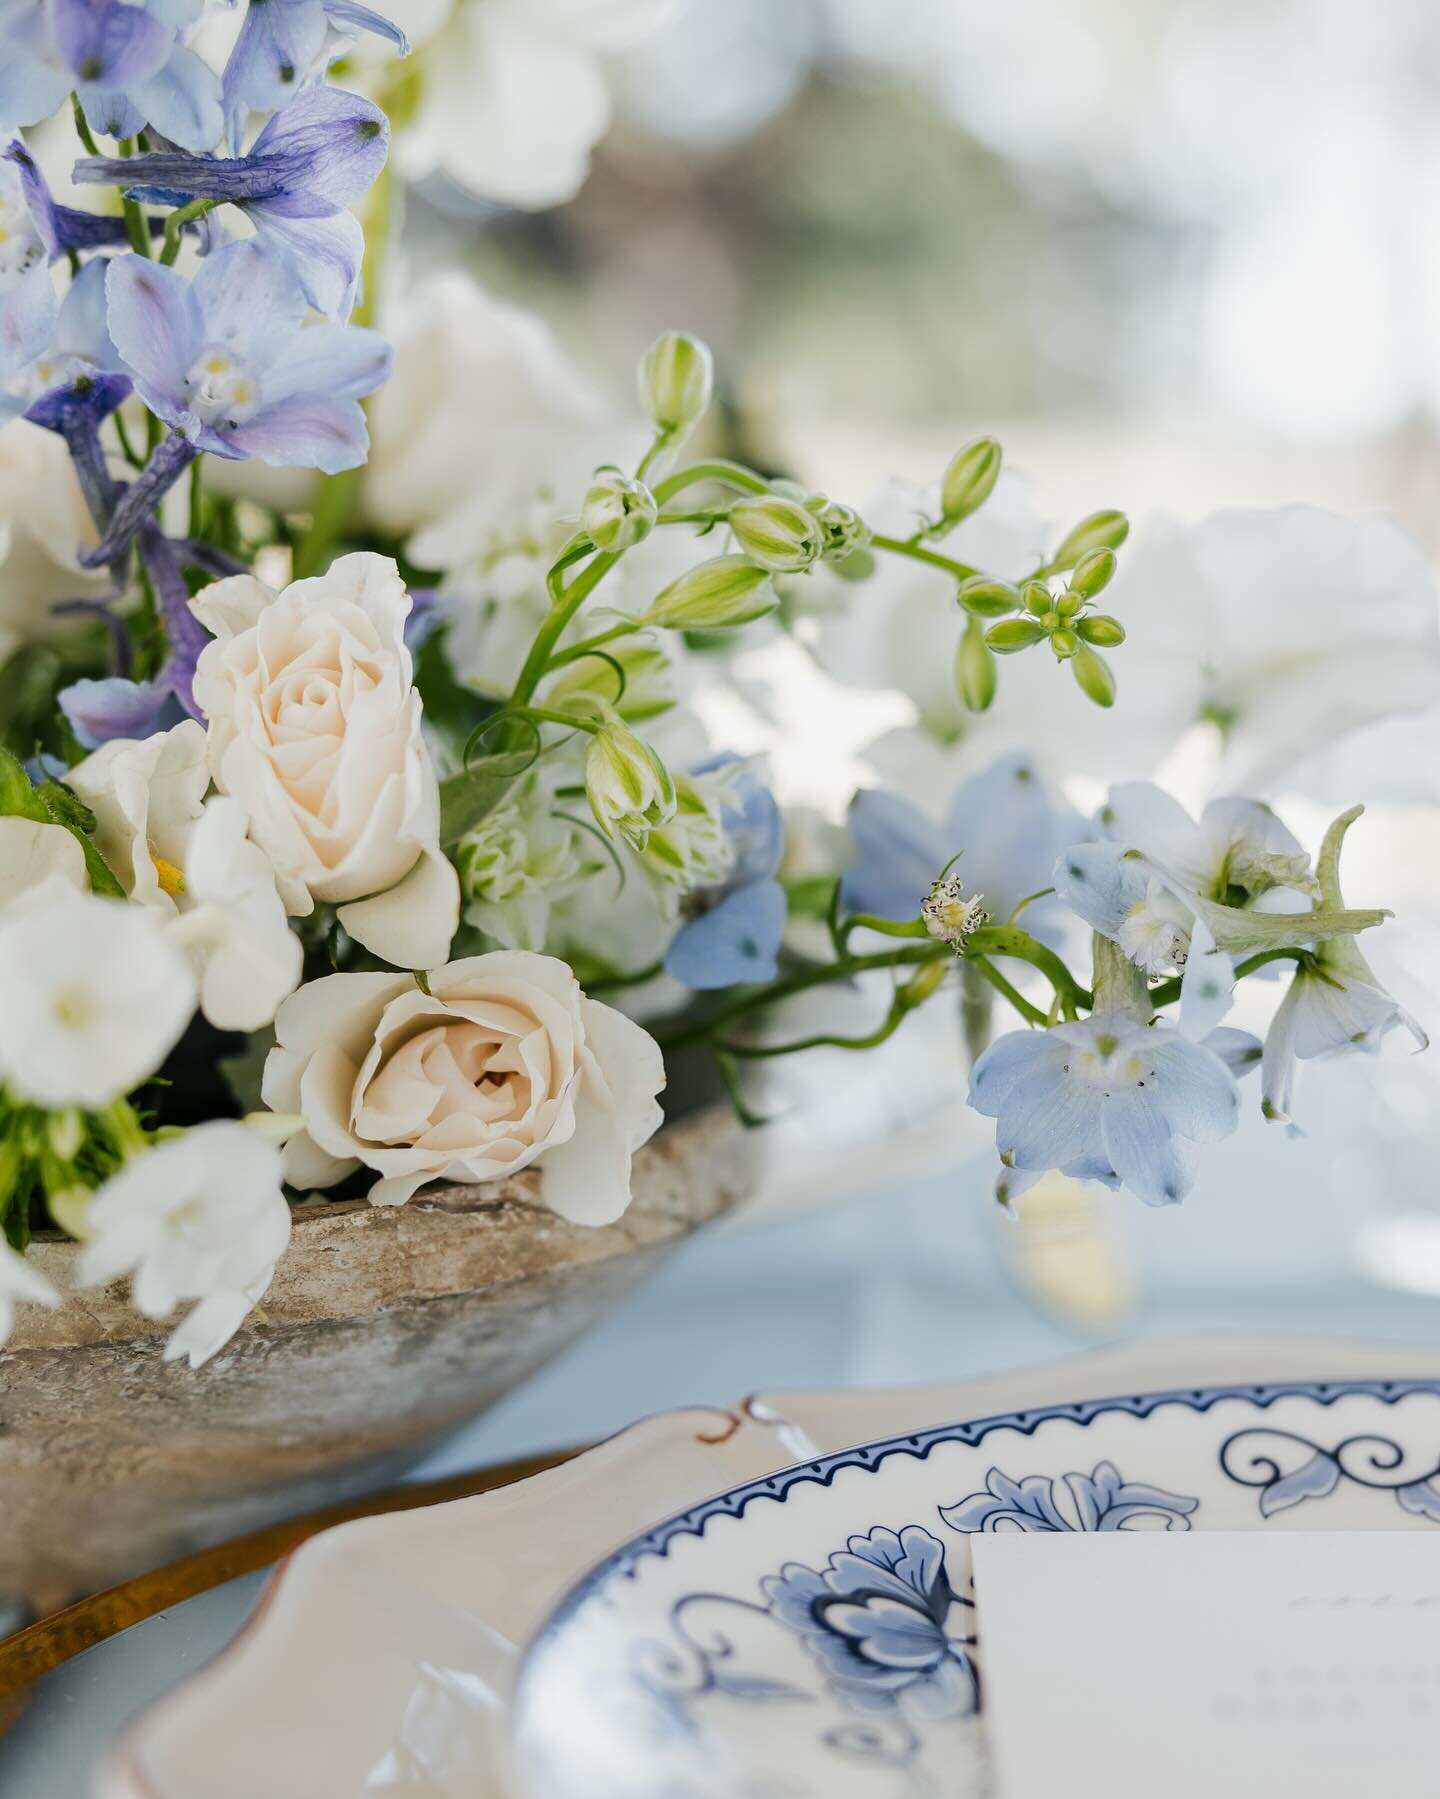 I adore this blend of garden-style blues and whites. The captivating scene as the sunset delicately illuminates the table settings is truly enchanting. 

Planning @hunterorcuttevents 
Photography @halliesosolikphotography